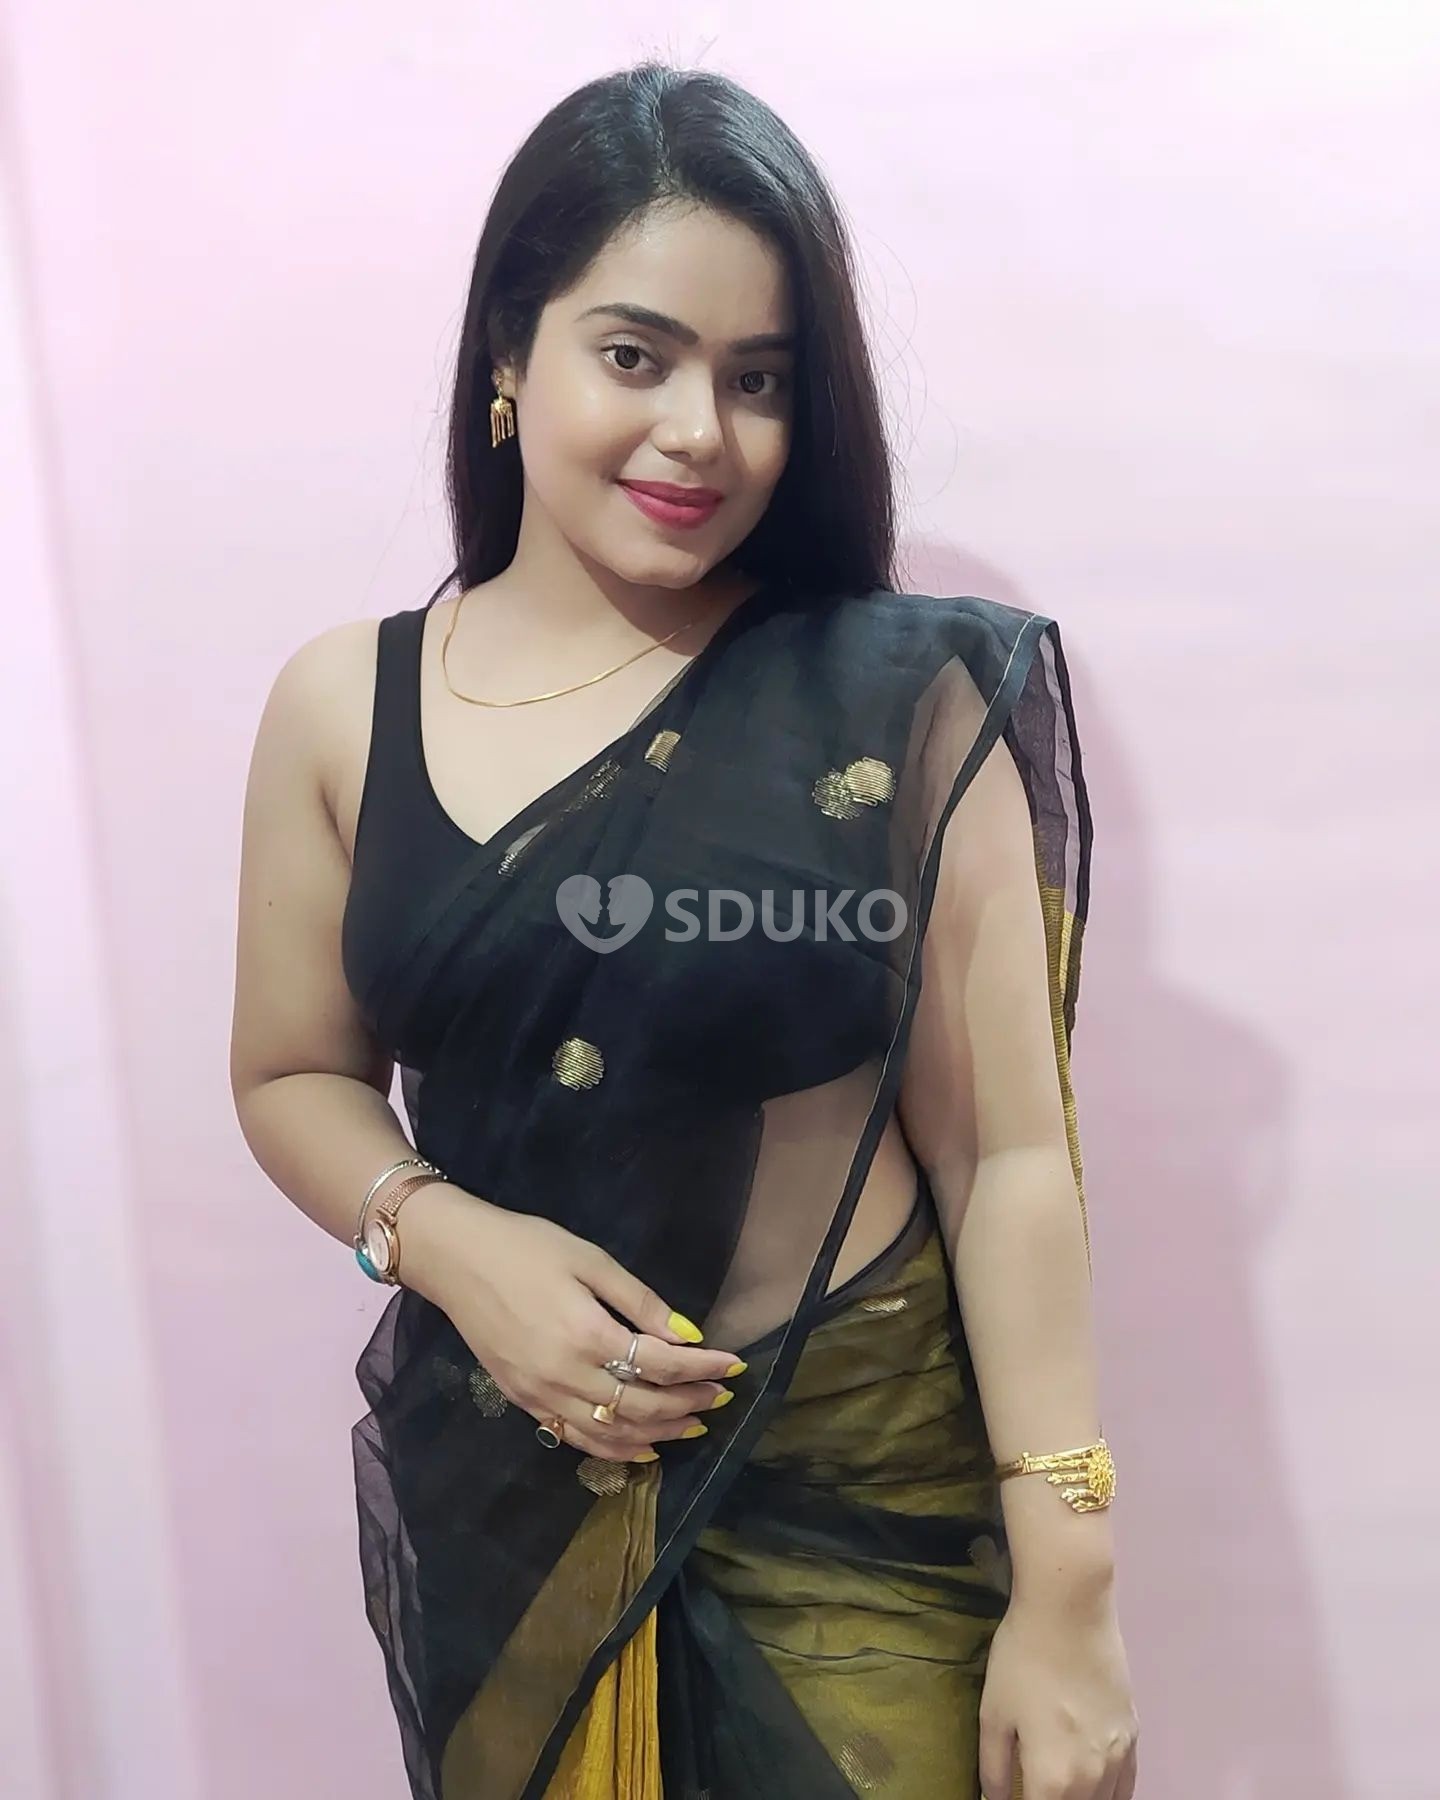 KOTA 💯% SAFE AND SECURE TODAY LOW PRICE UNLIMITED ENJOY HOT COLLEGE GIRL HOUSEWIFE AUNTIES AVAILABLE. ....